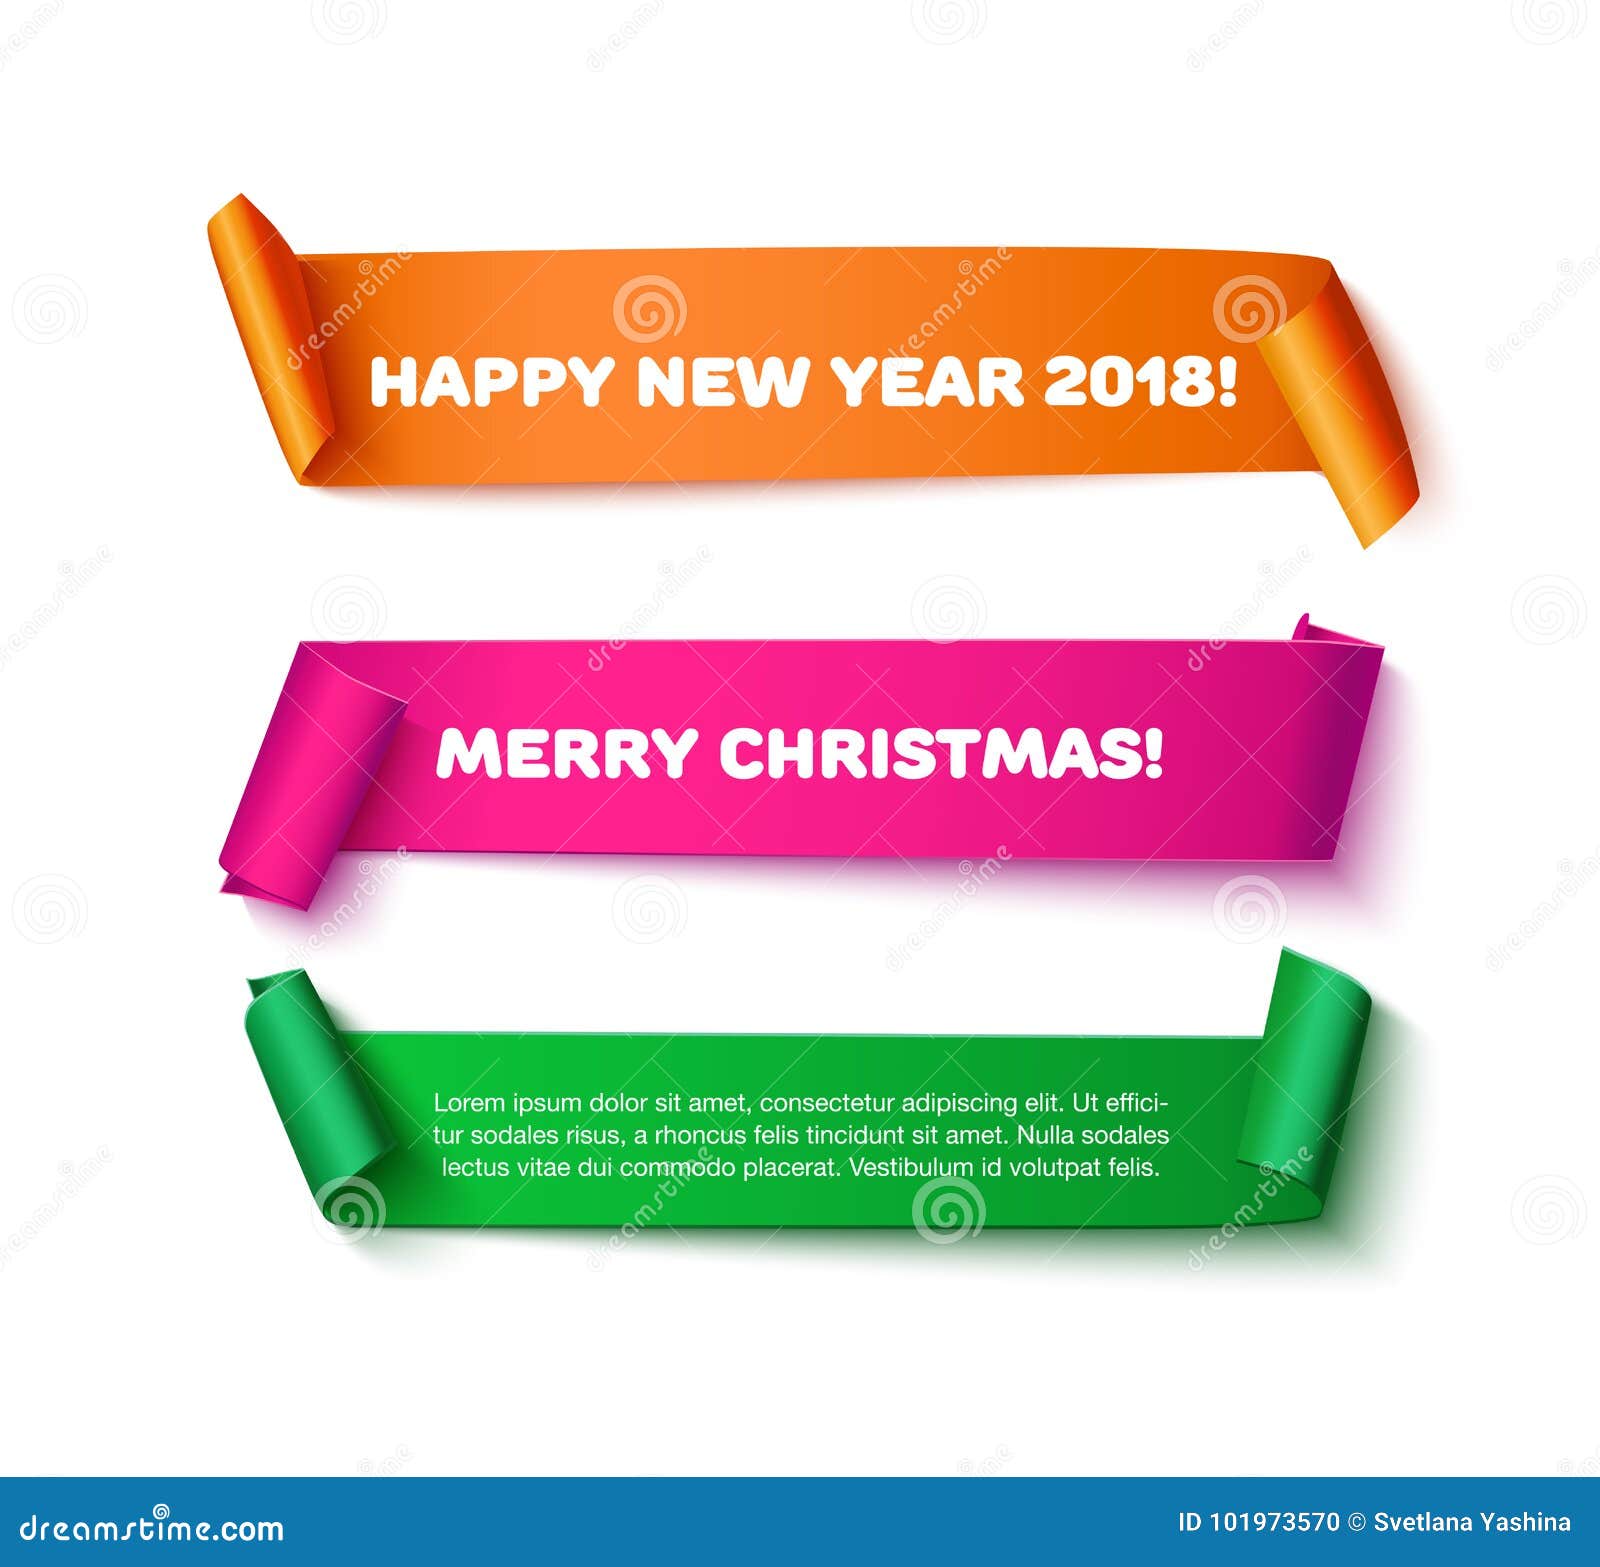 Colorful curved paper ribbon with roll realistic vector illustration Merry Christmas and Happy New Year 2018 greeting card banner poster design